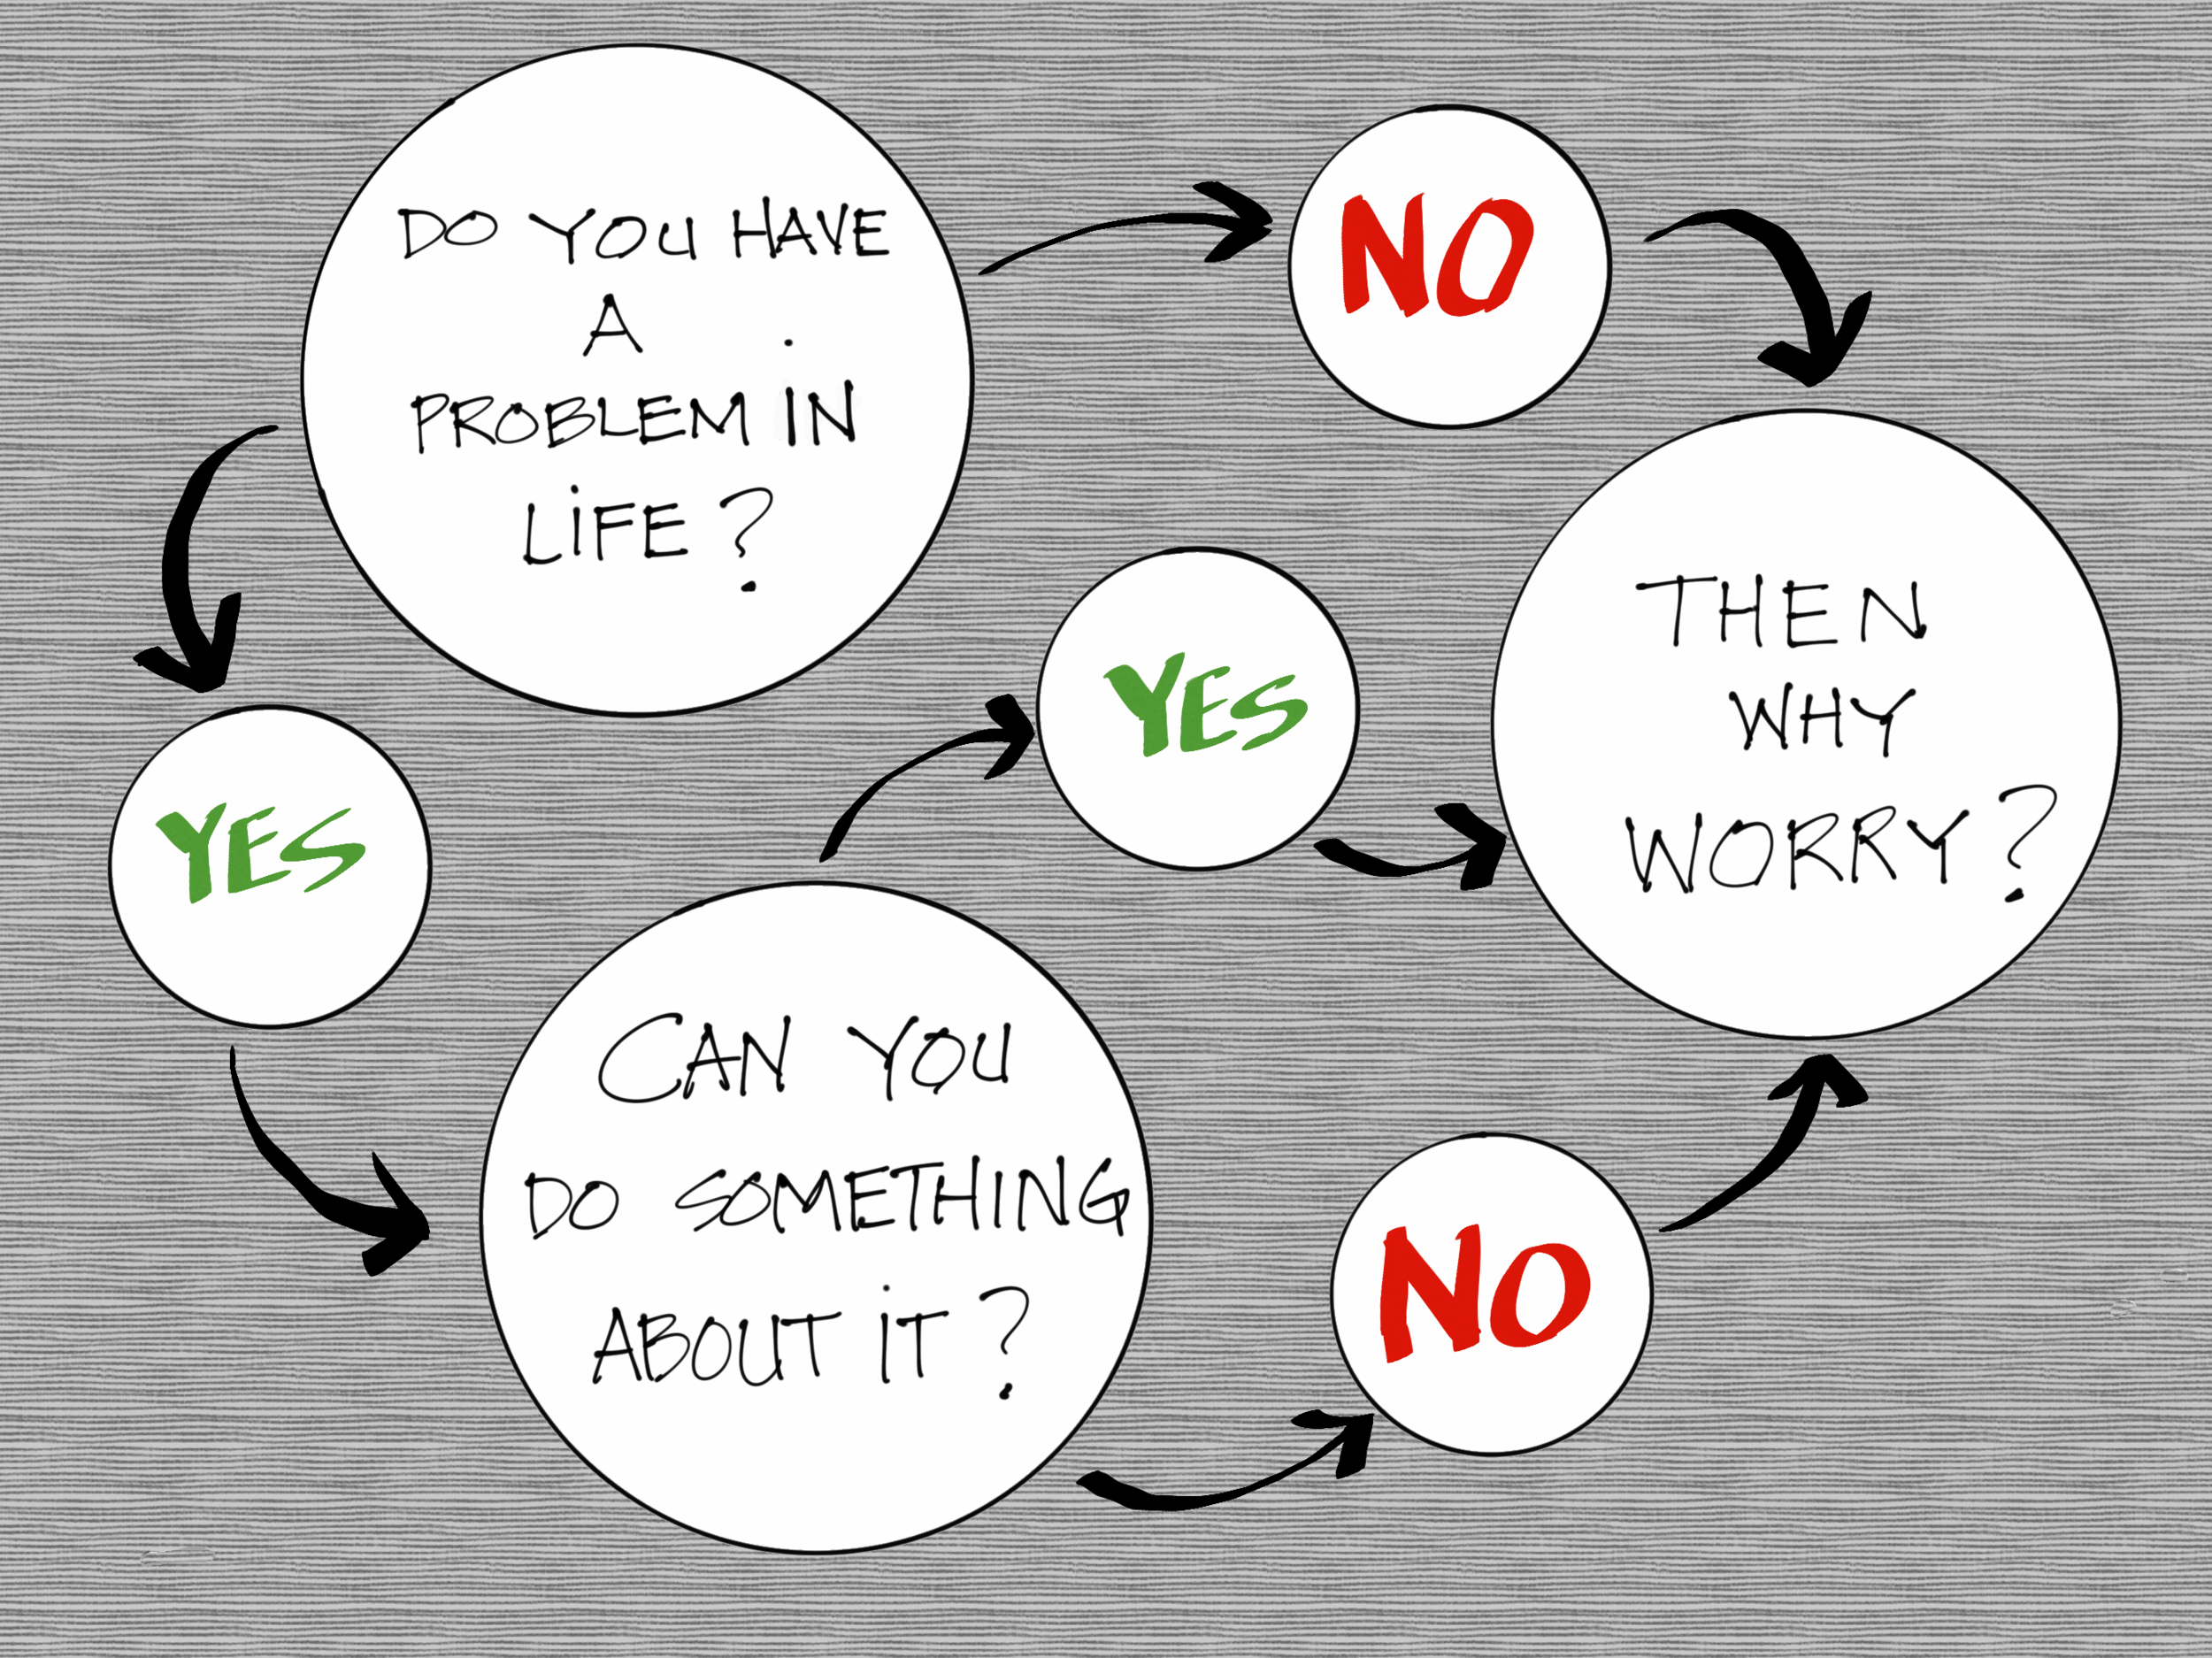 Why Worry Chart